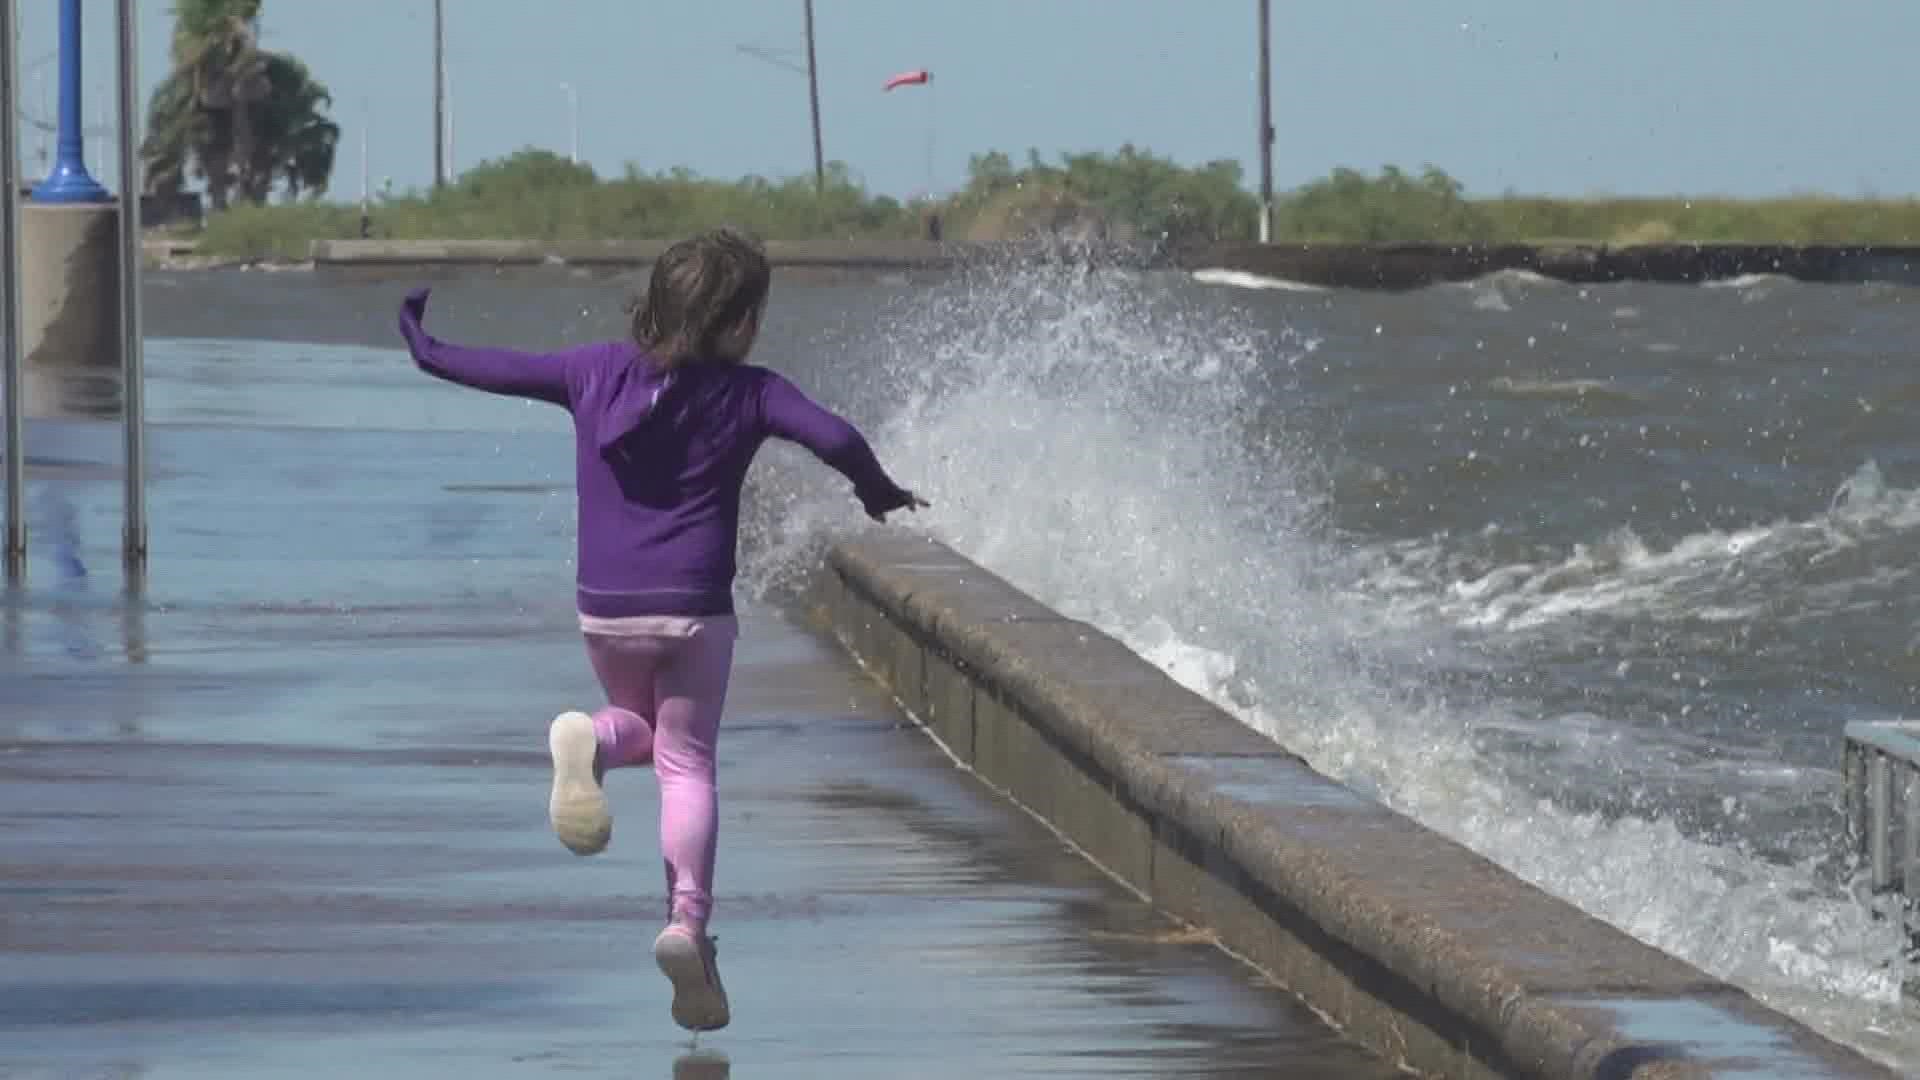 High winds are blowing through New Orleans thanks to Hurricane Ian.